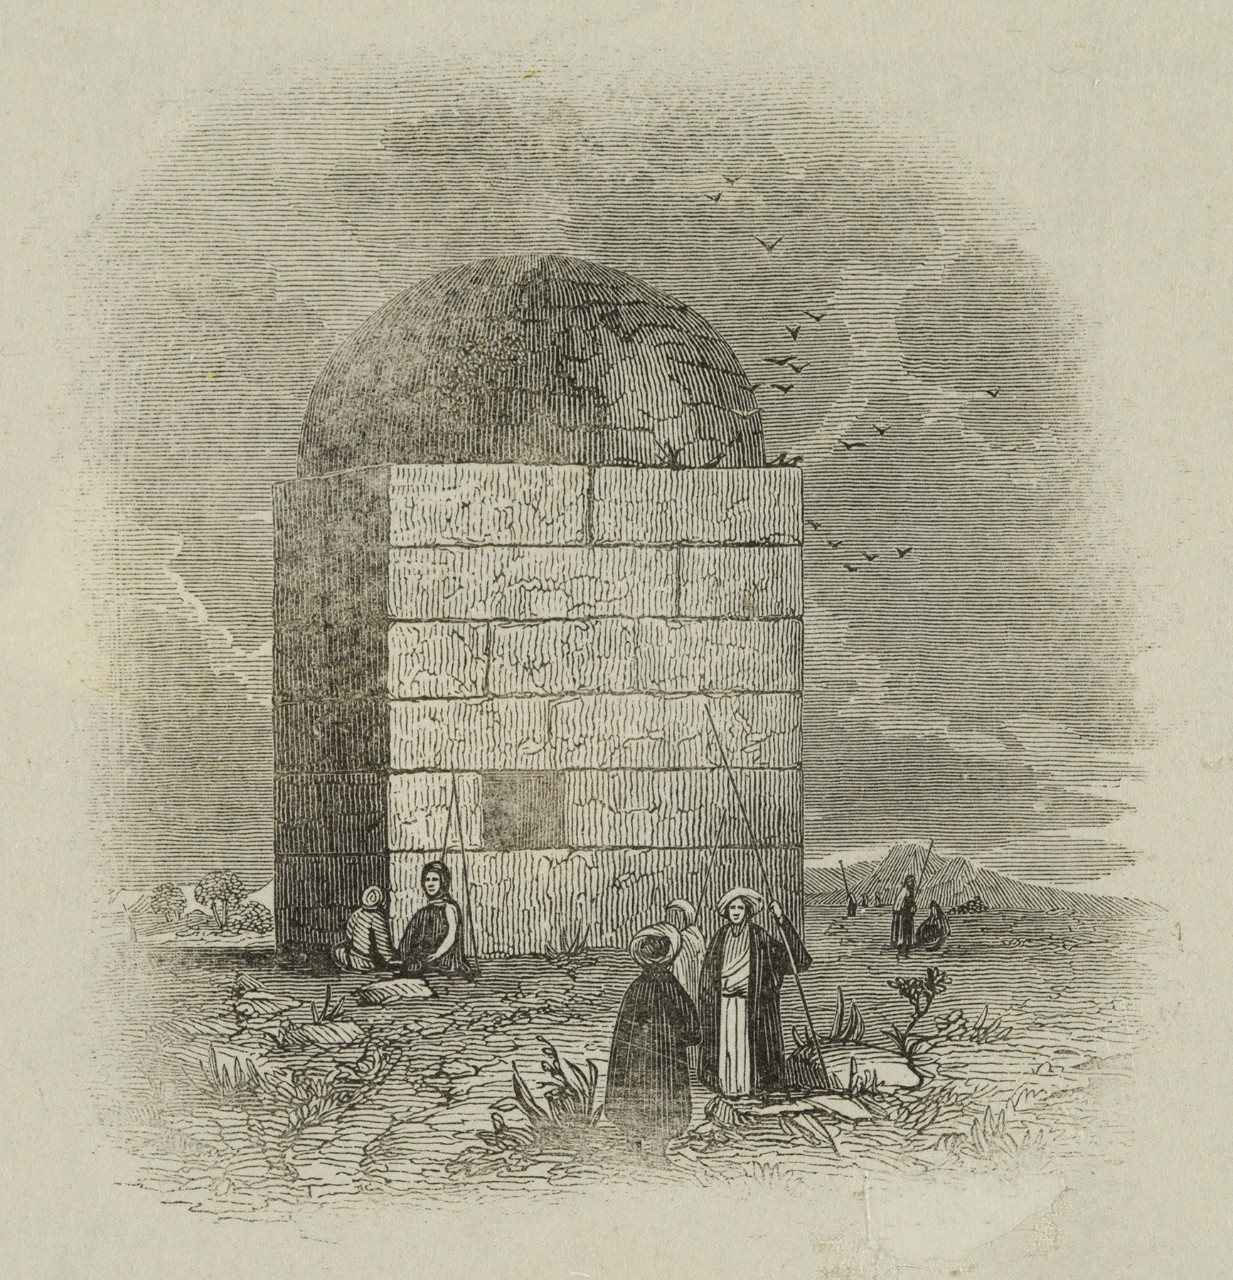 A structure with a group of men in front